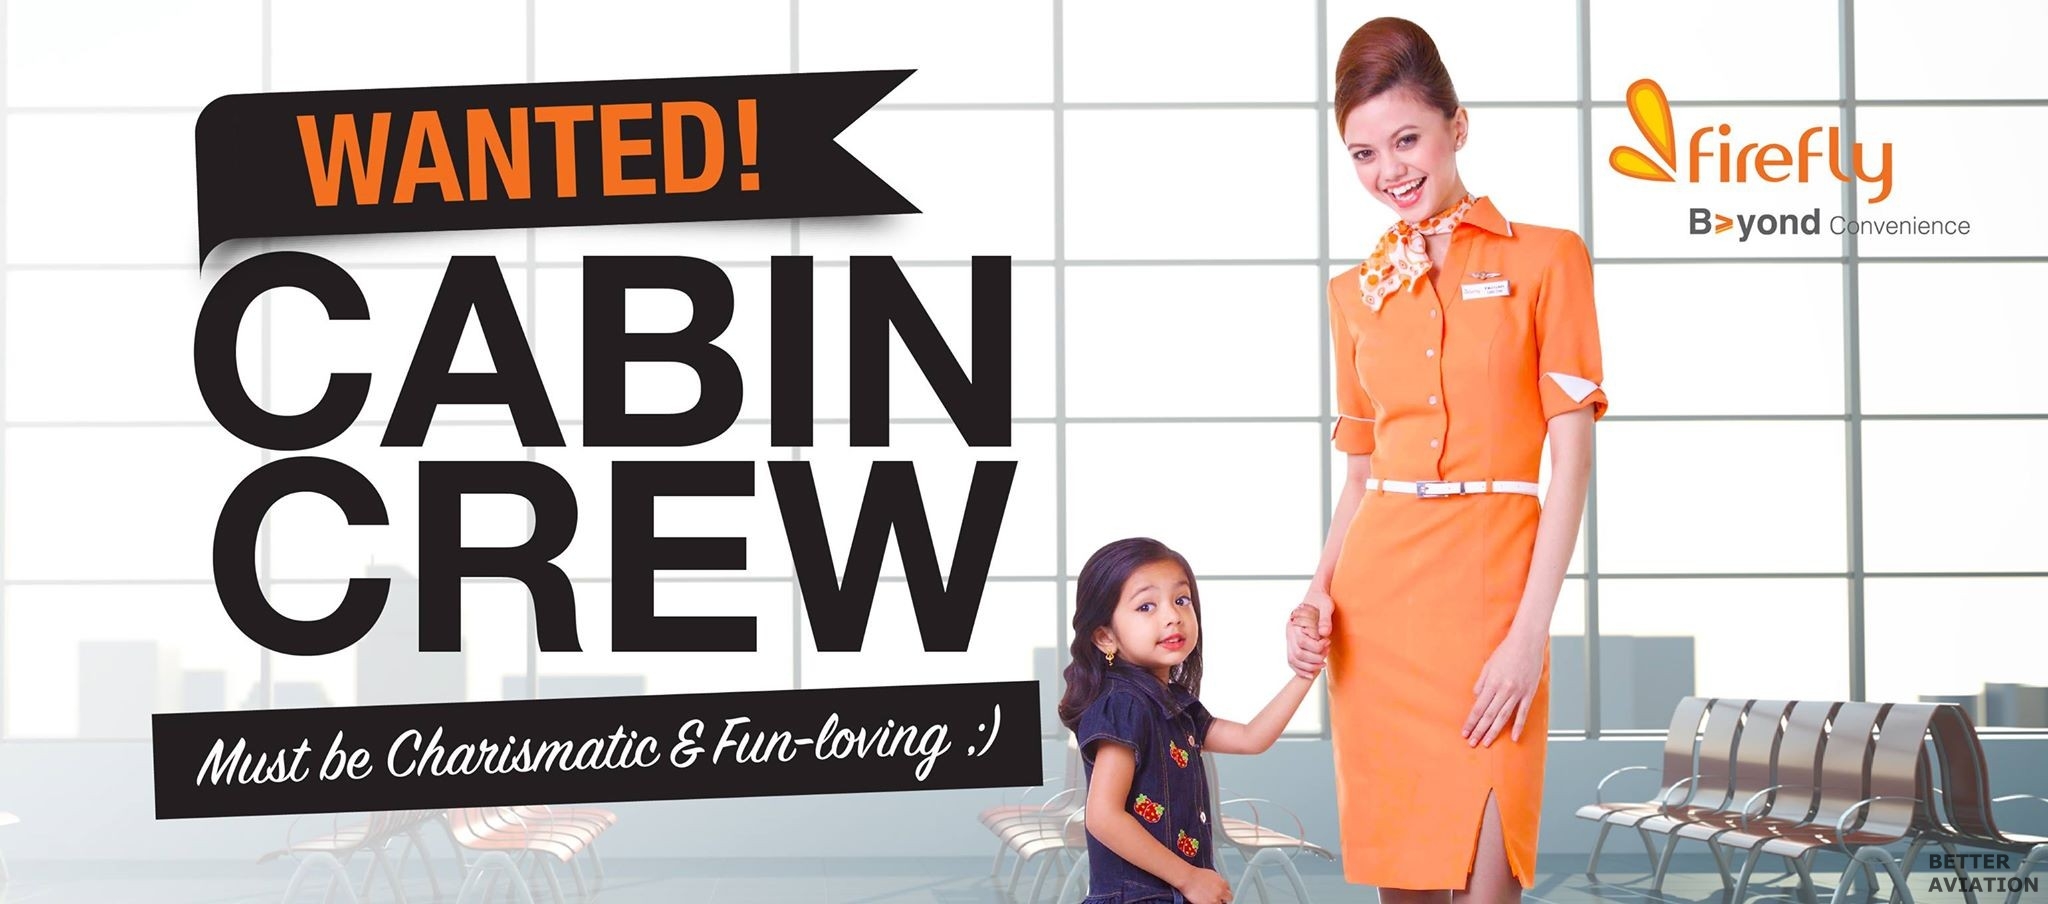 Firefly Cabin Crew Wanted